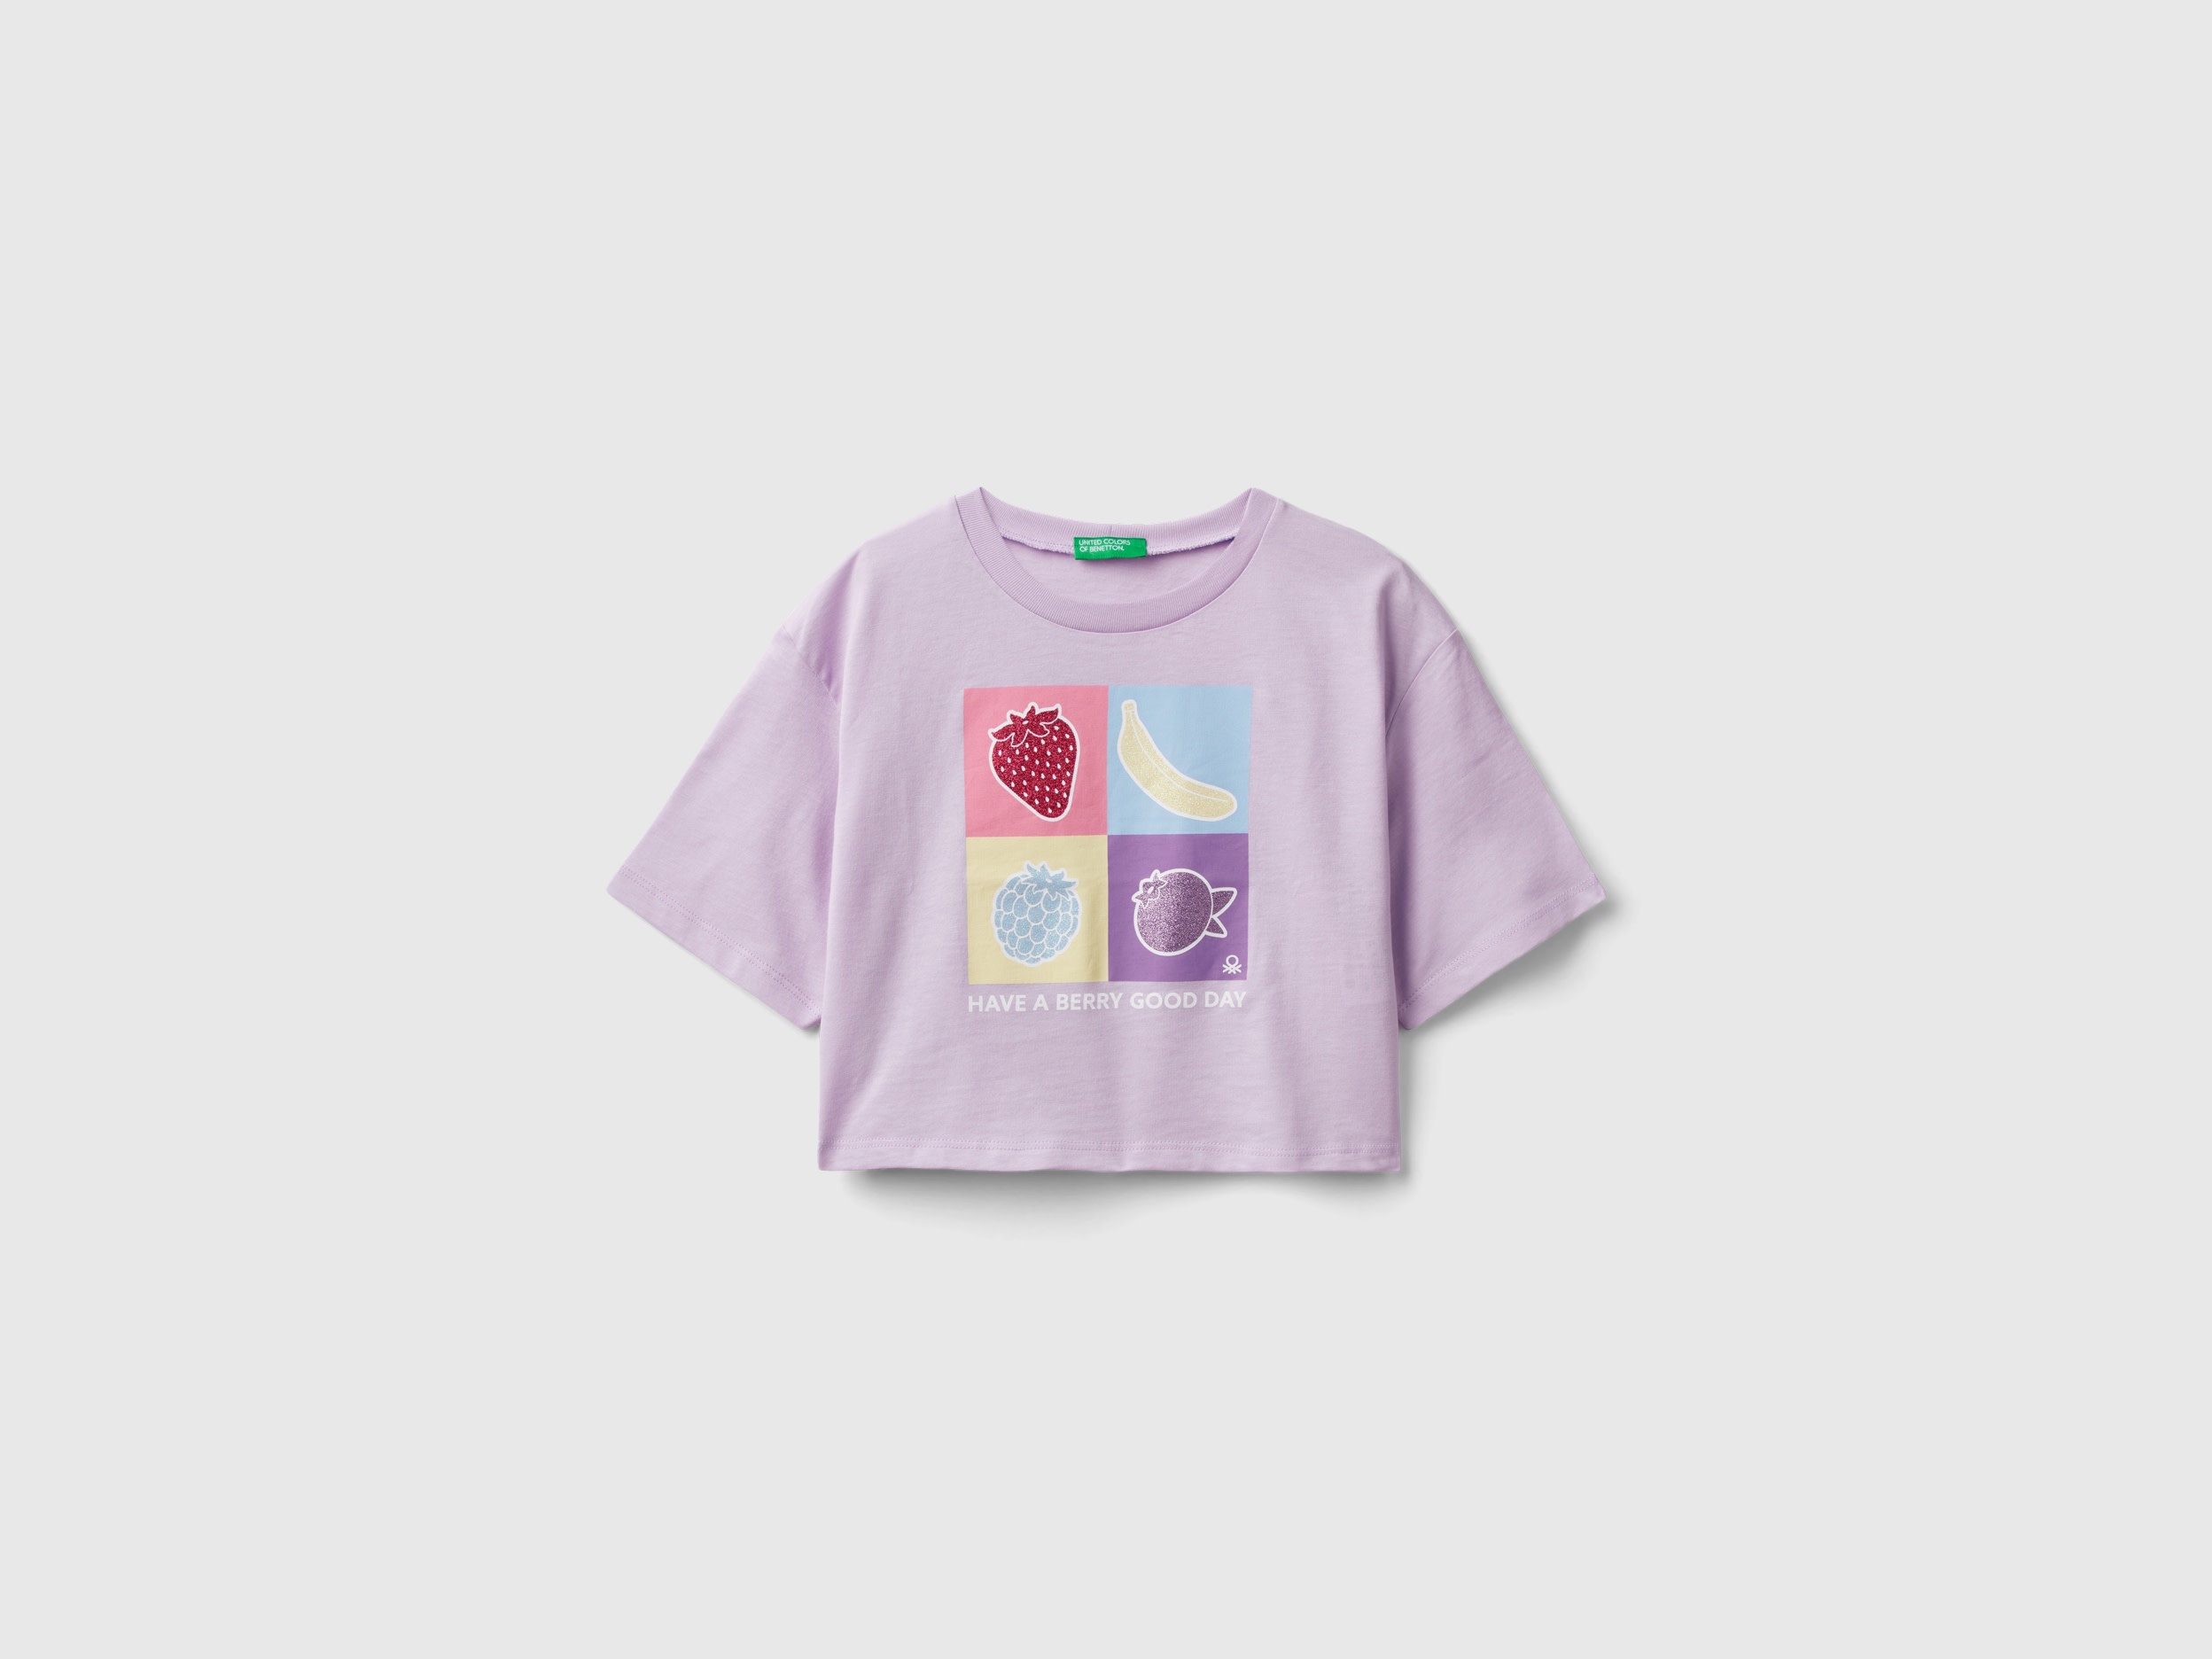 Image of Benetton, T-shirt With Glittery Print, size L, Lilac, Kids